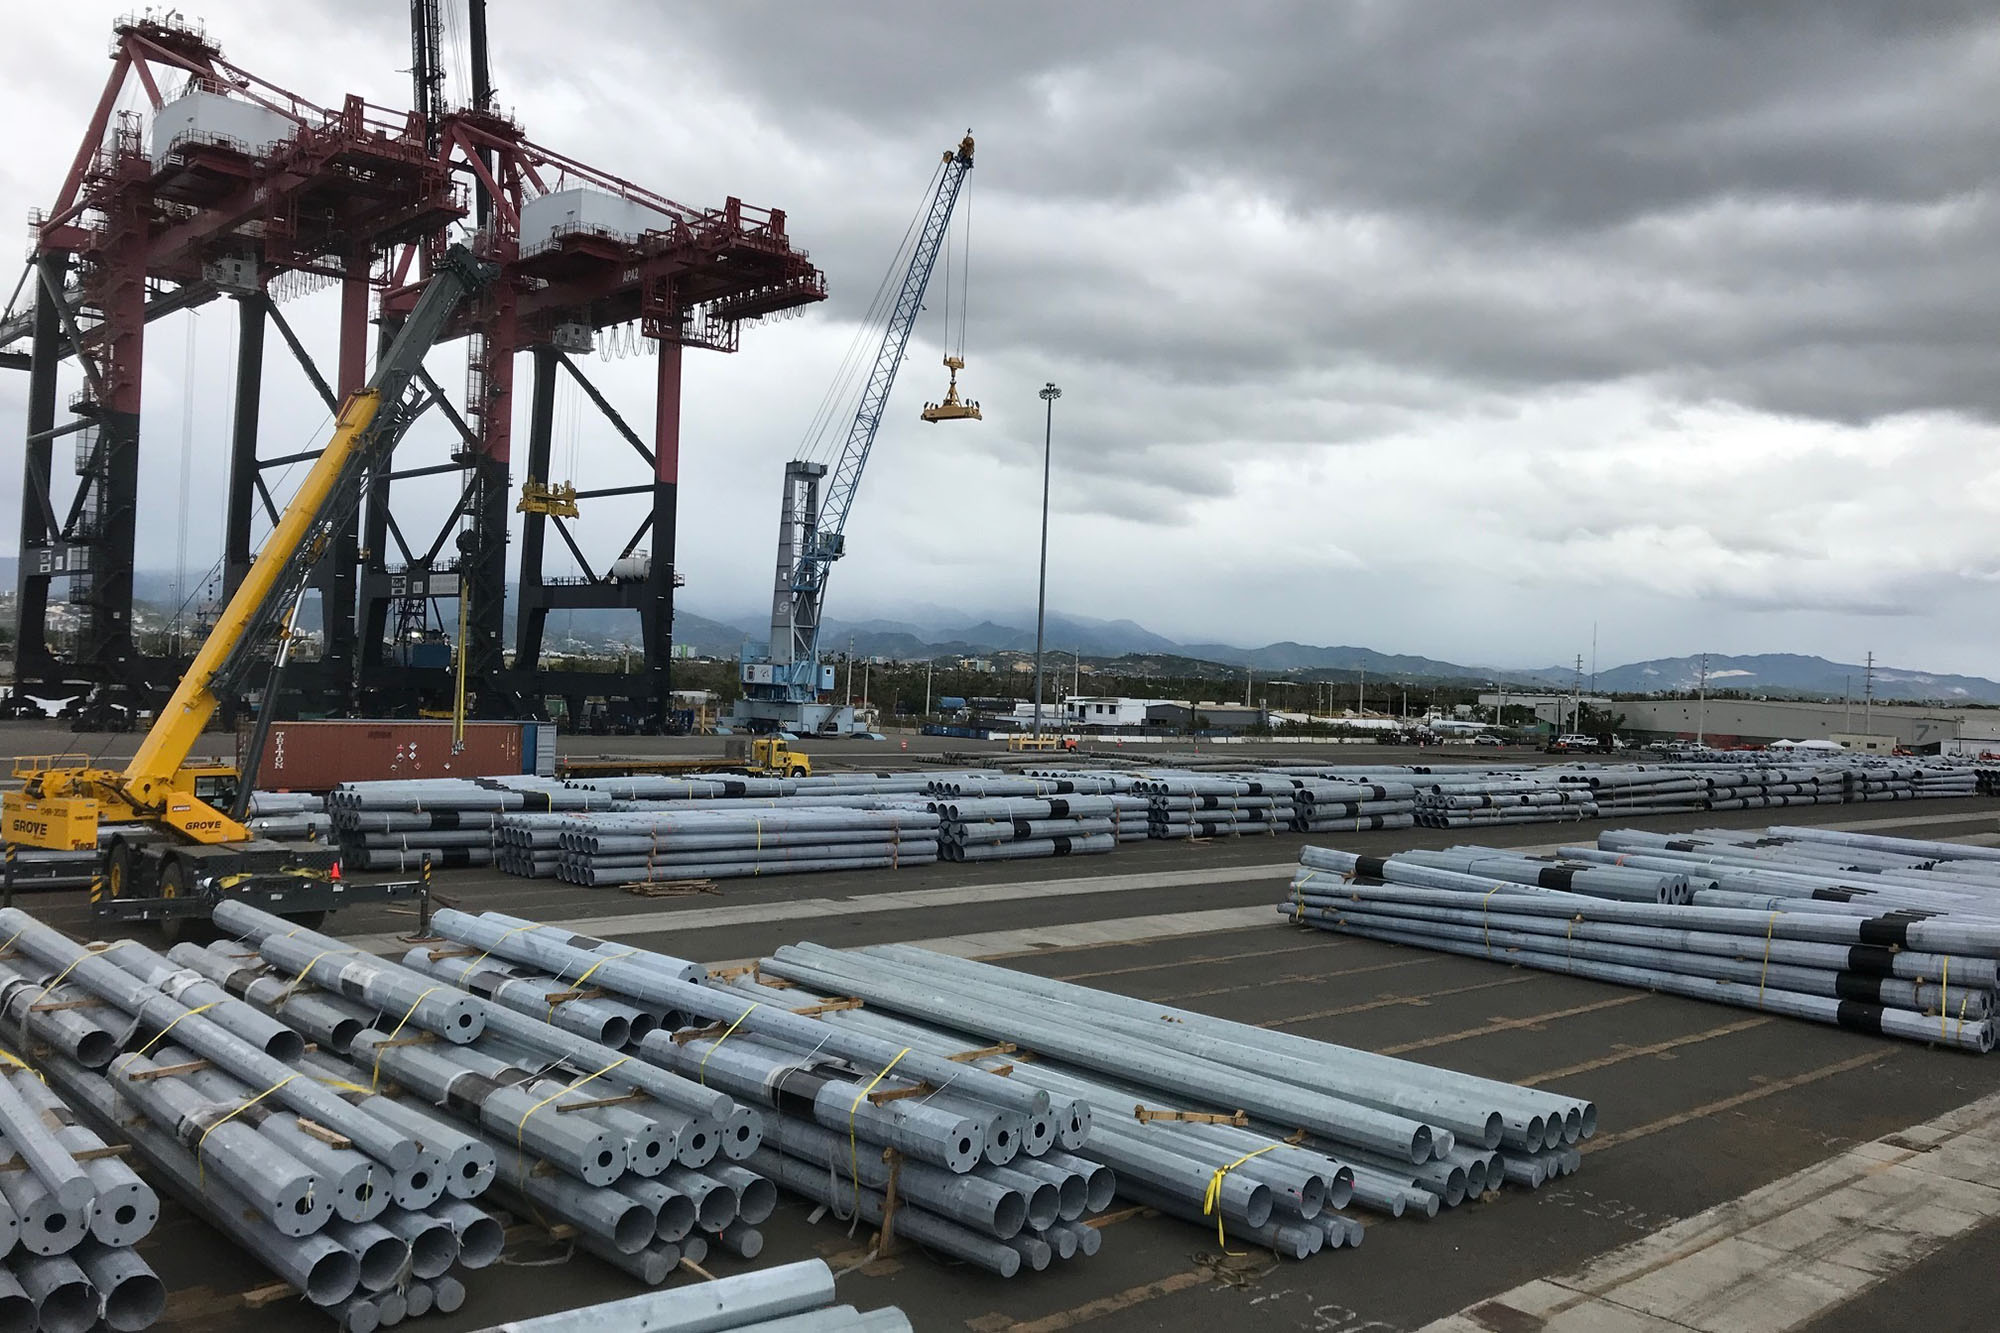 Large piles of power poles on a dock with large unloading equipment